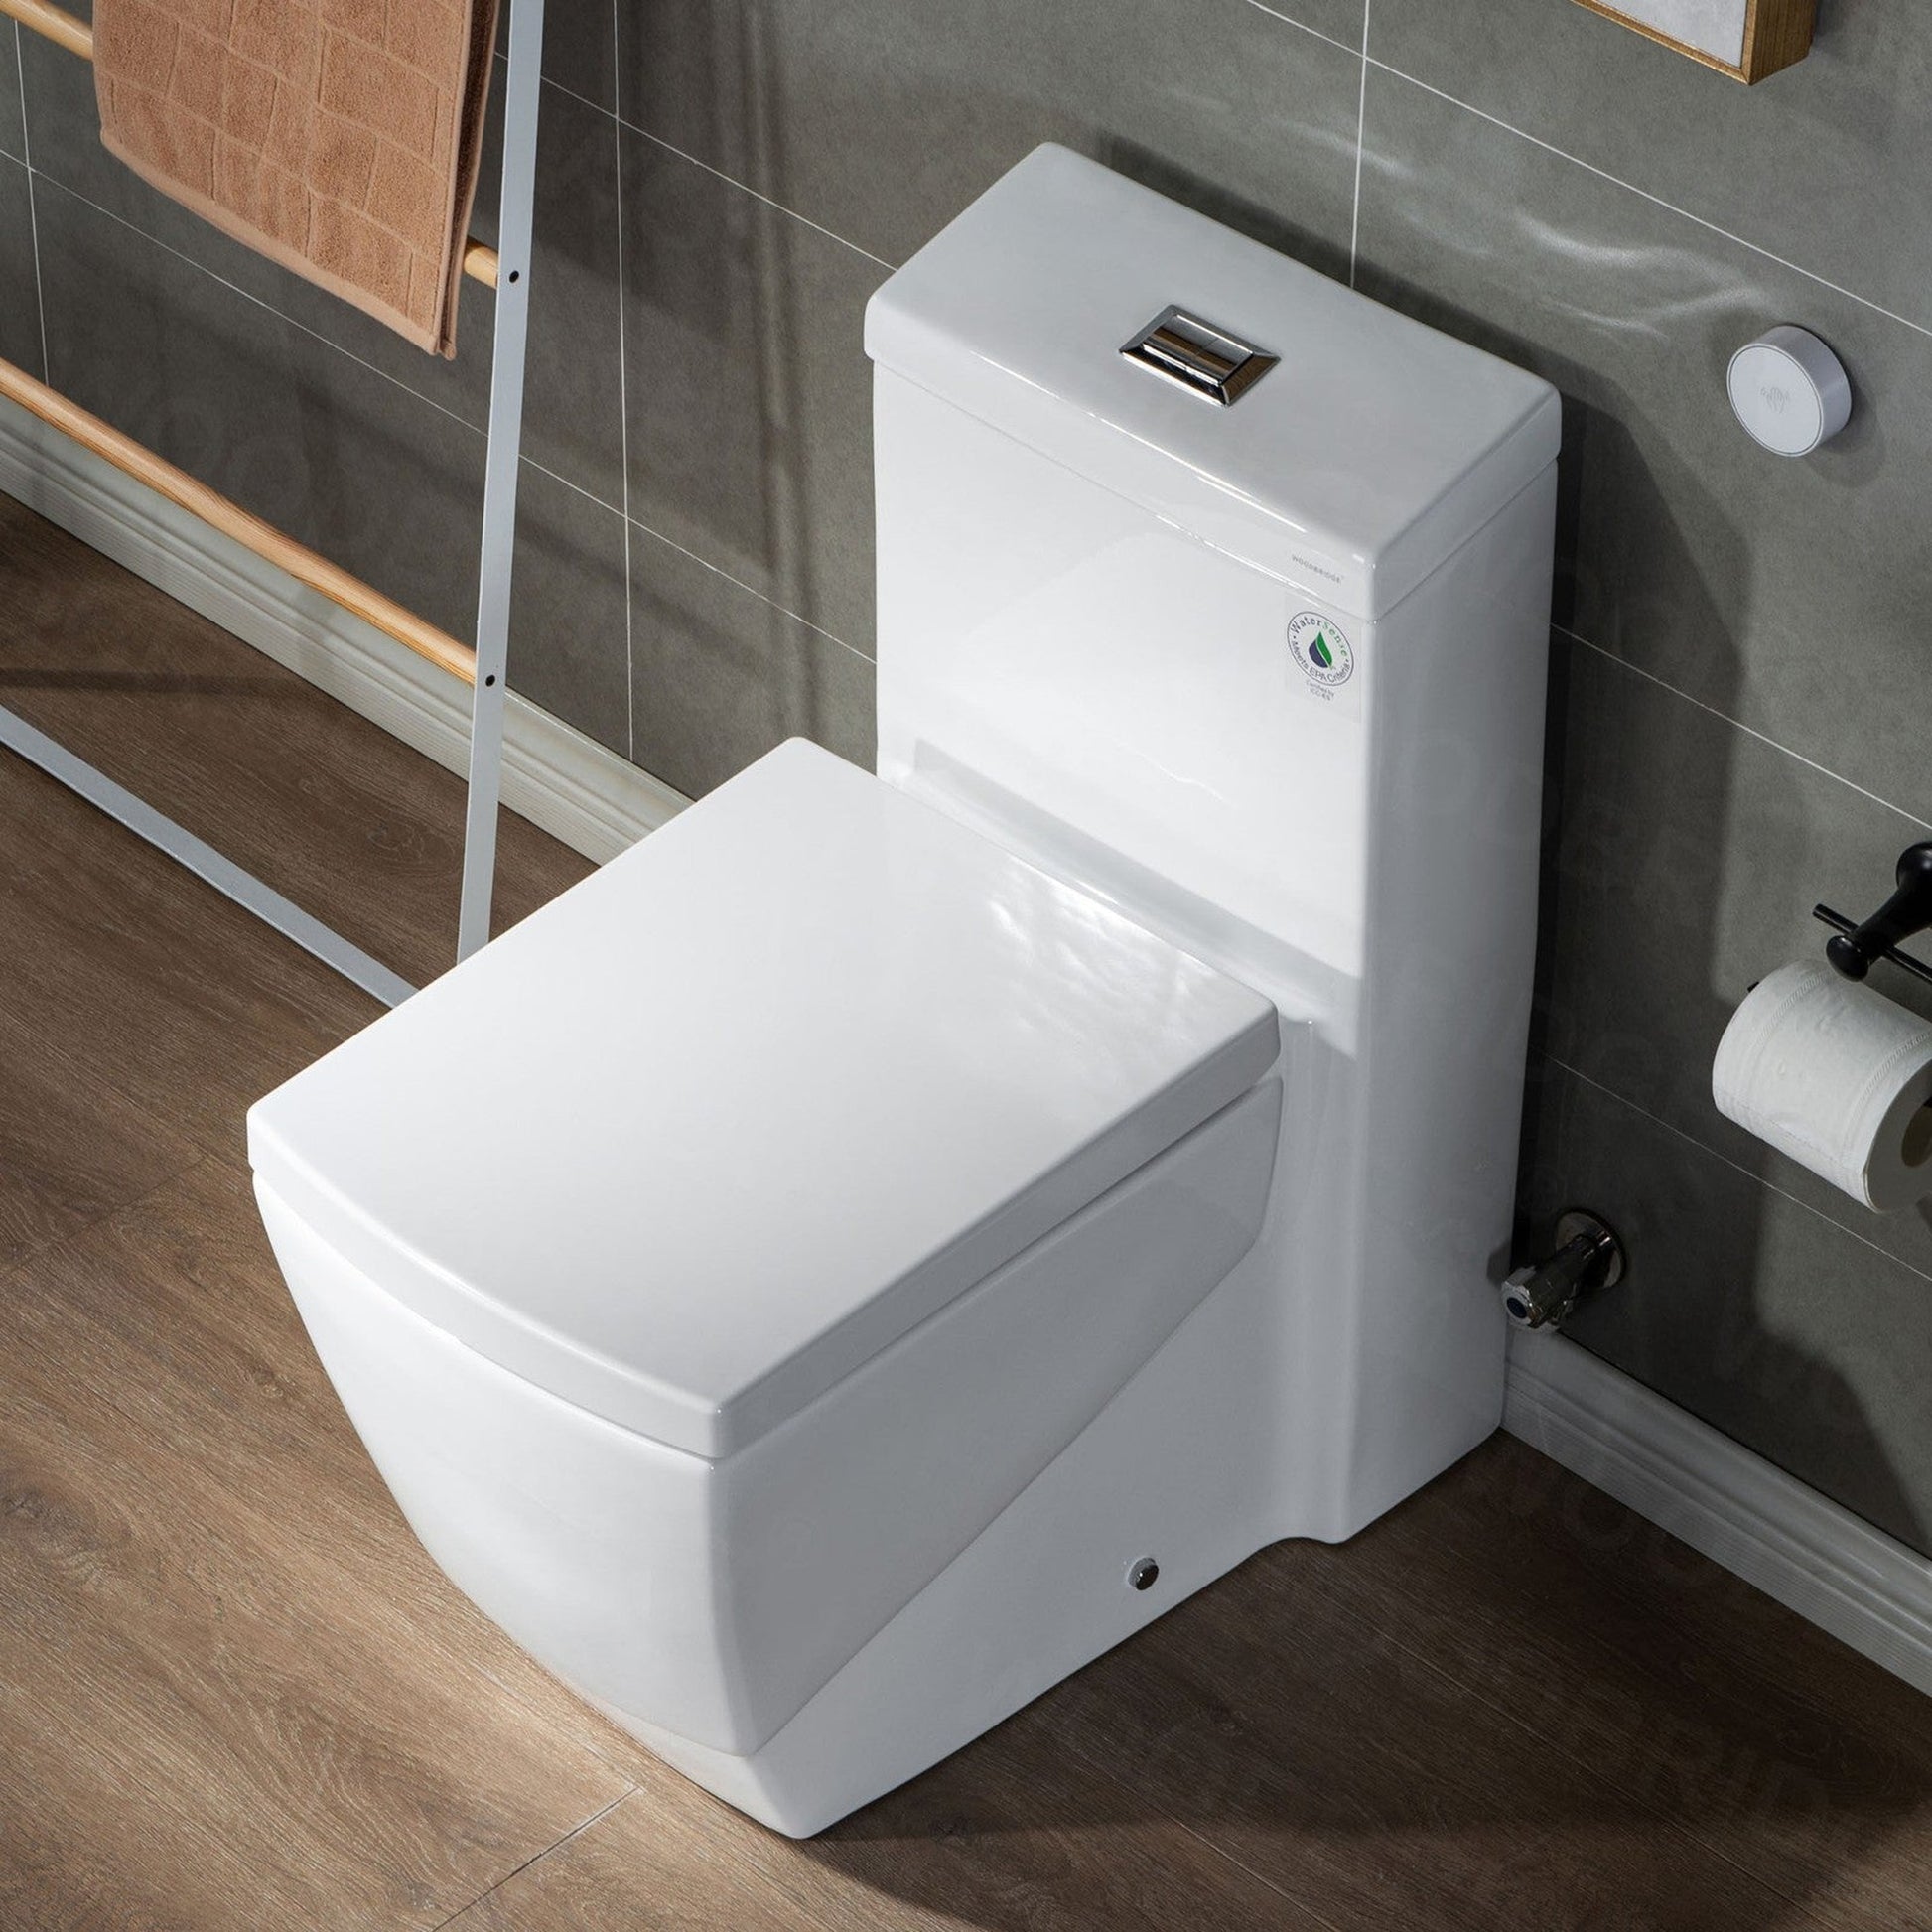 WoodBridge B-0920-A White Modern One-Piece Elongated Square Toilet With Solf Closed Seat and Hand Free Touchless Sensor Flush Kit